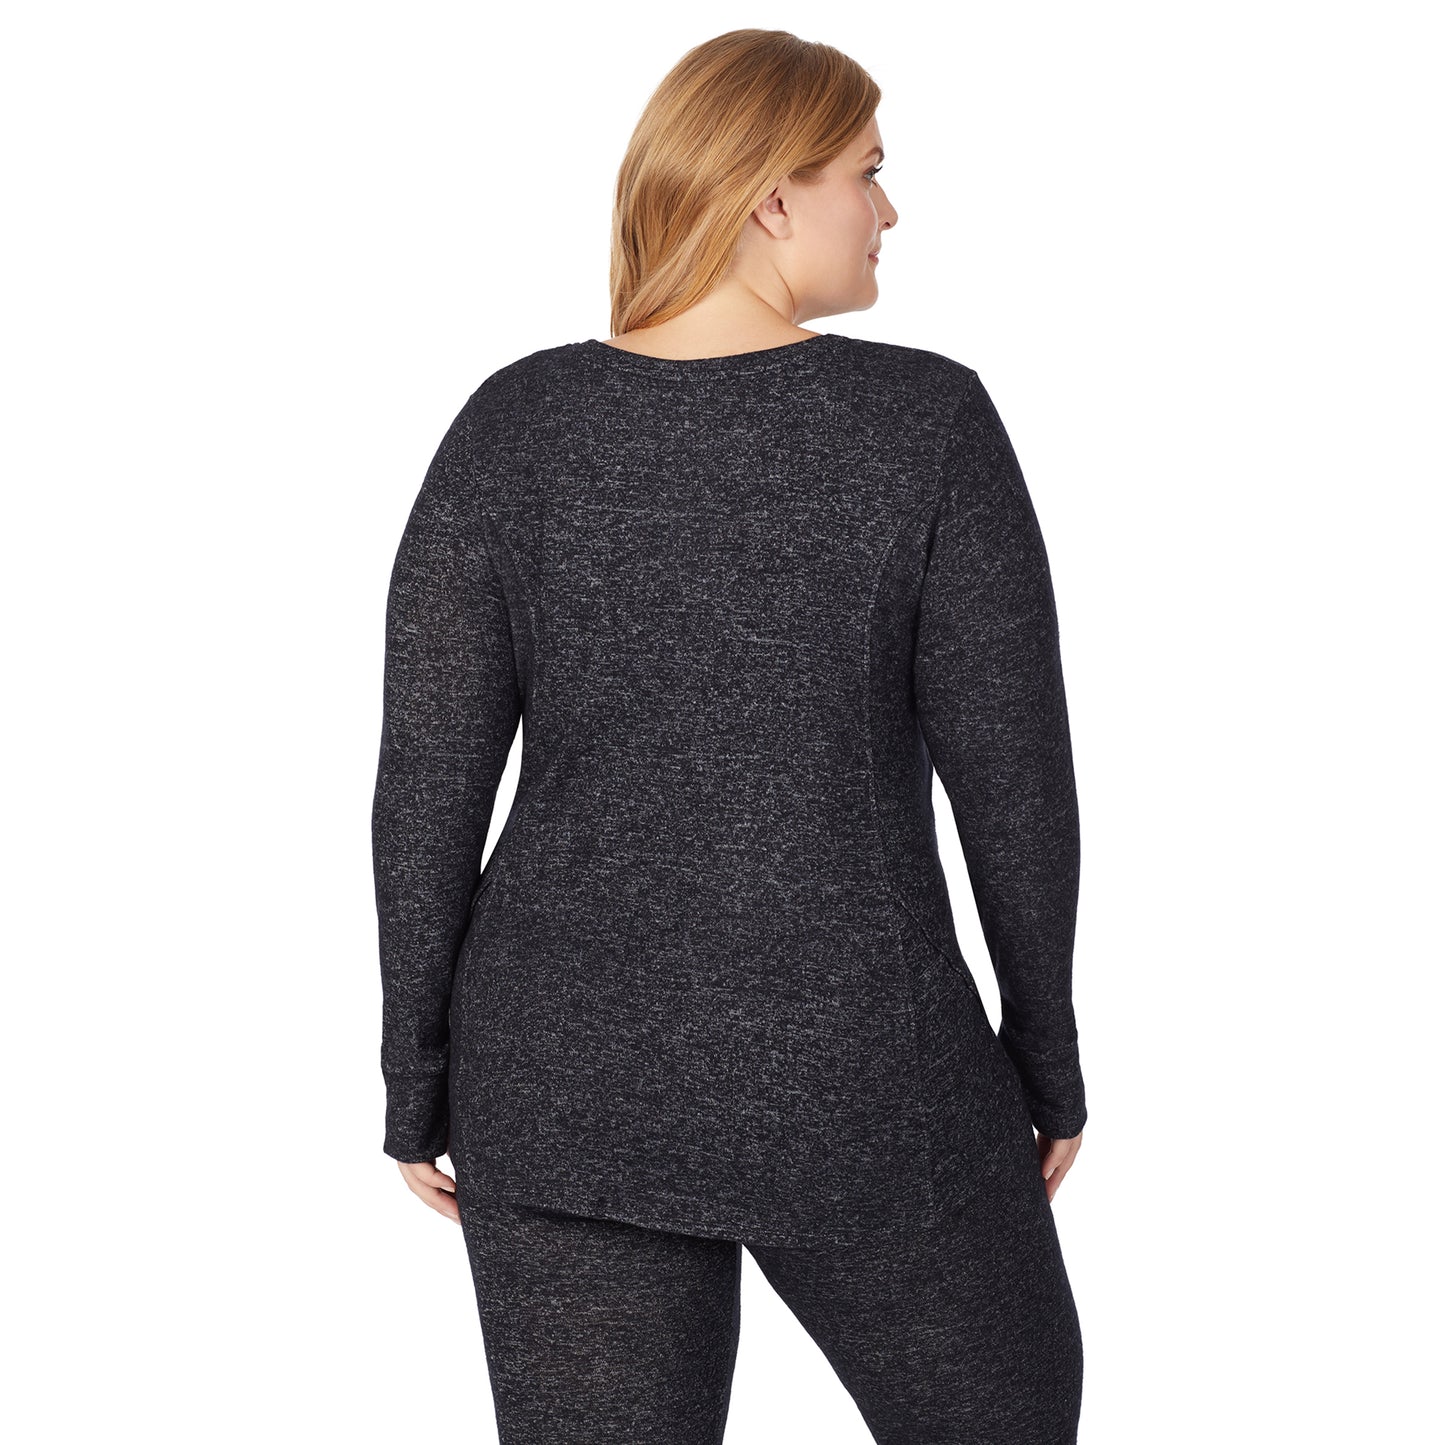 Marled Dark Charcoal; Model is wearing size 1X. She is 5'9", Bust 38", Waist 36", Hips 48.5". @A lady wearing a marled dark charcoal long sleeve crew plus.